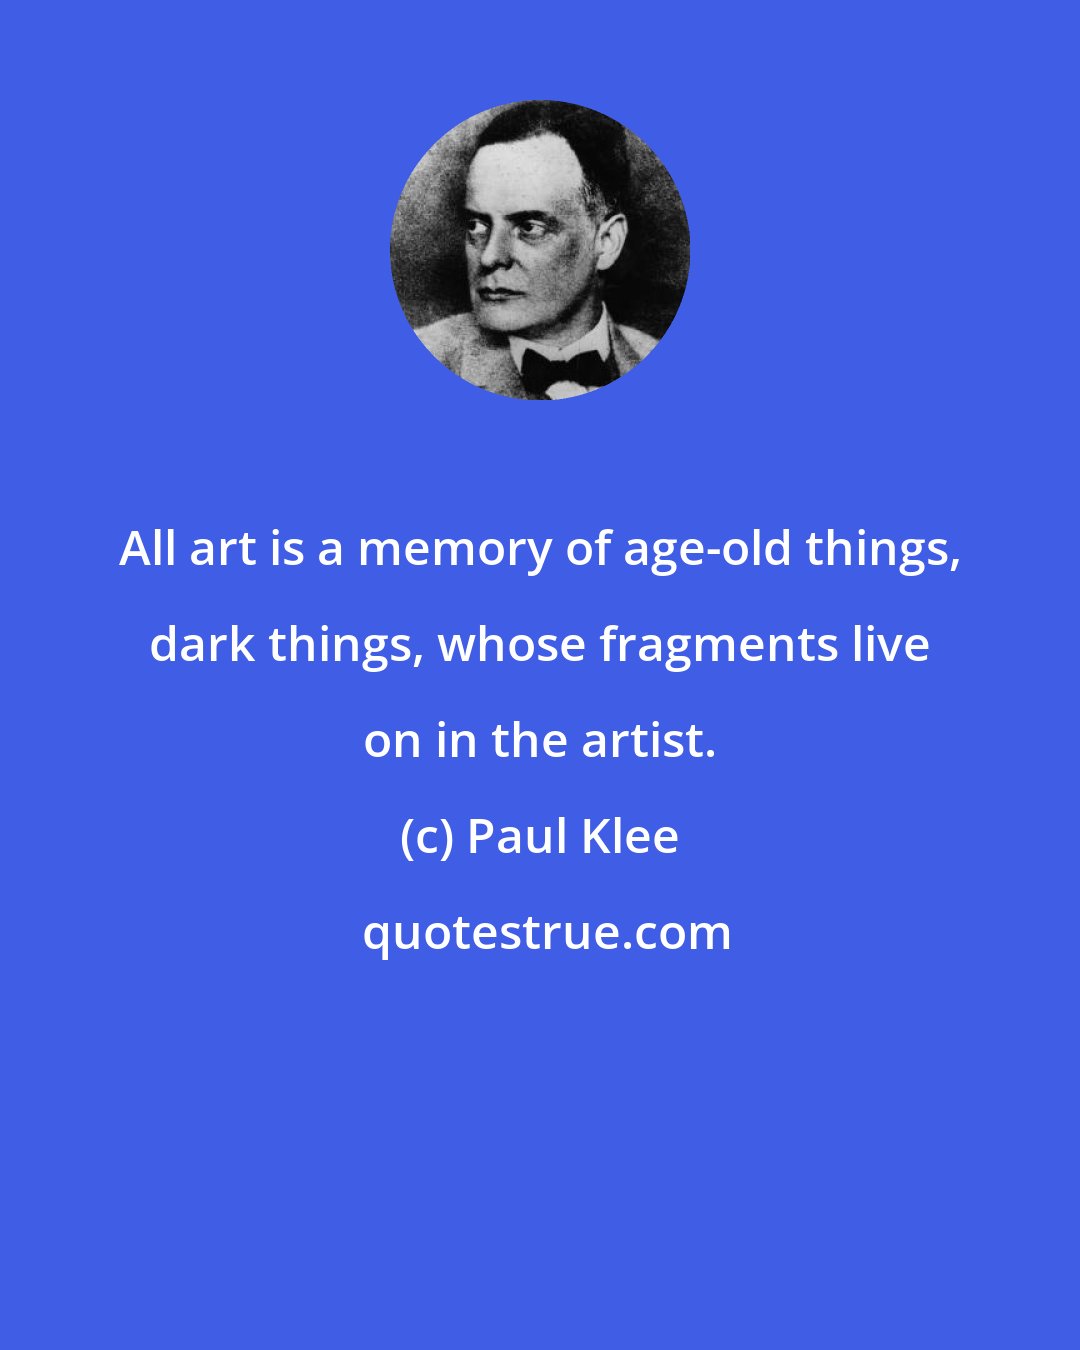 Paul Klee: All art is a memory of age-old things, dark things, whose fragments live on in the artist.